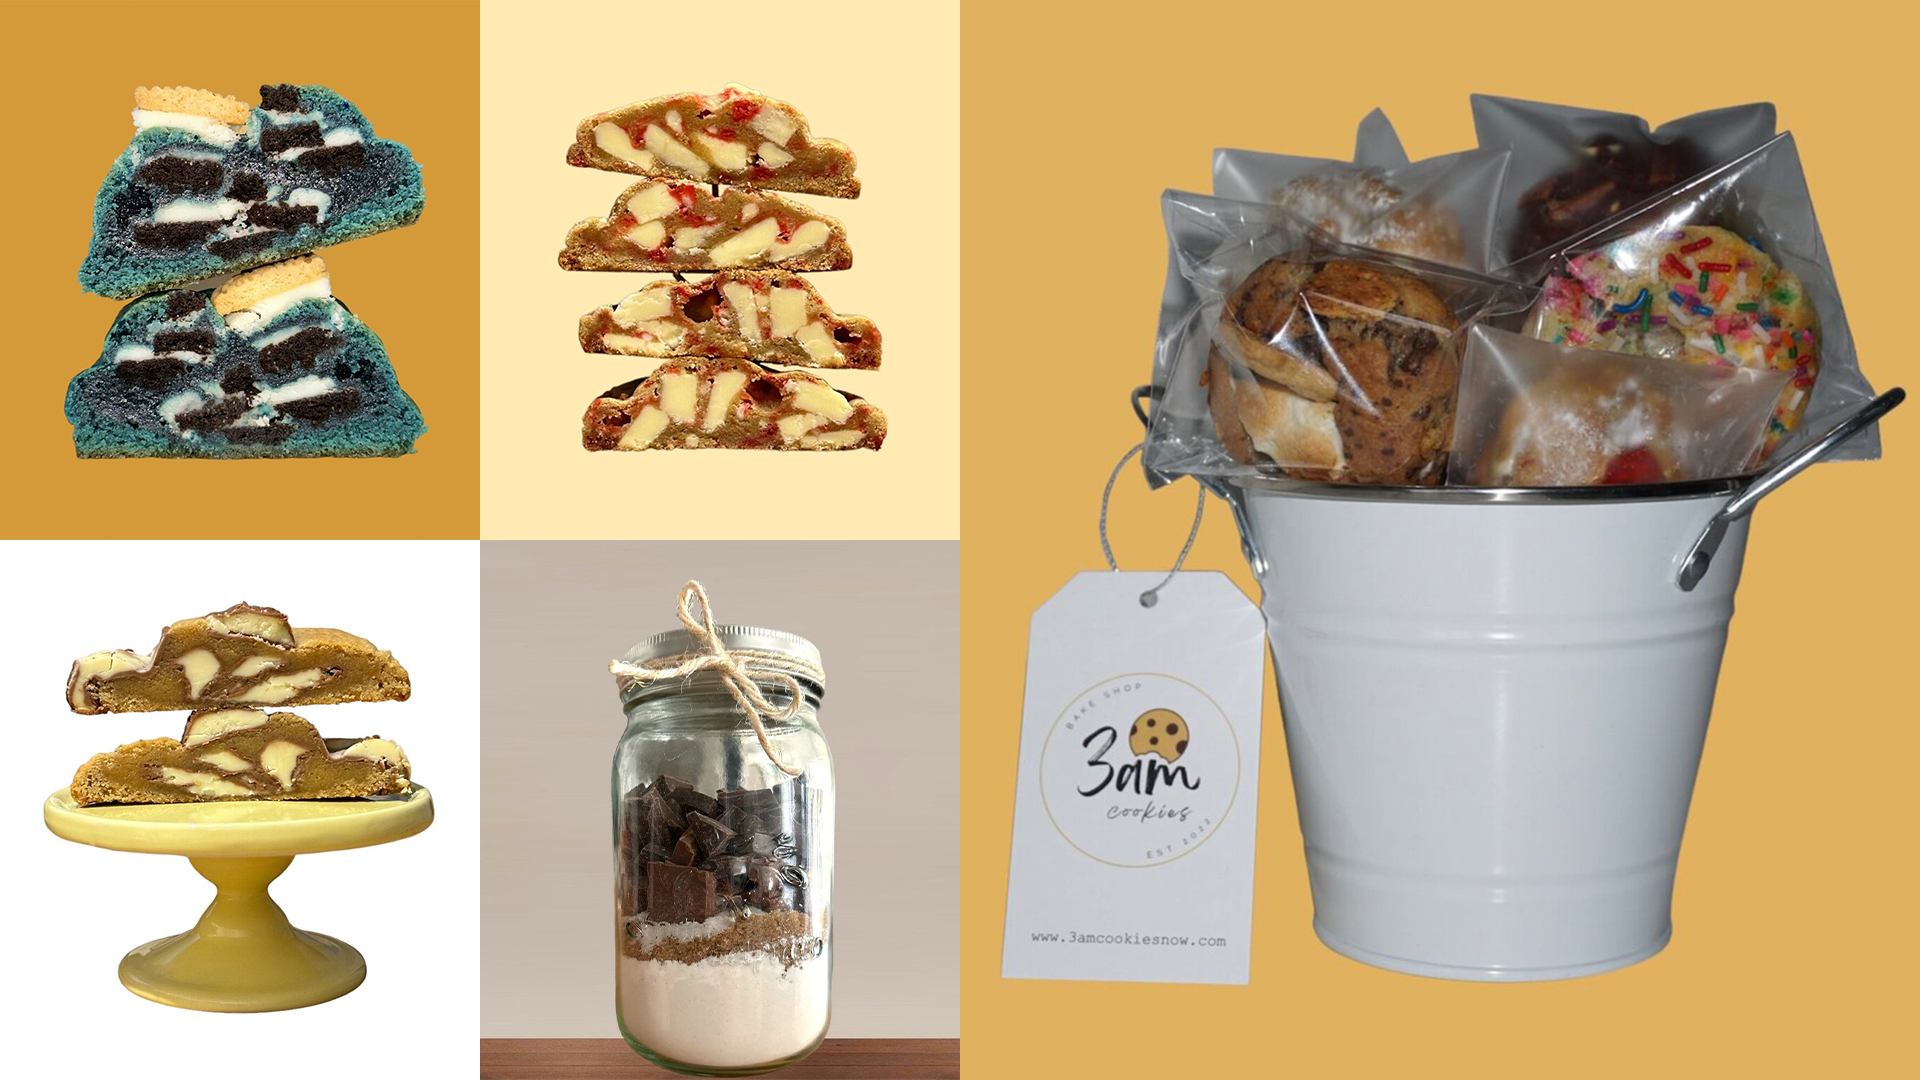 3am Cookies offers several products including seasonal treats, a cookie basket, a DIY cookie kit and more